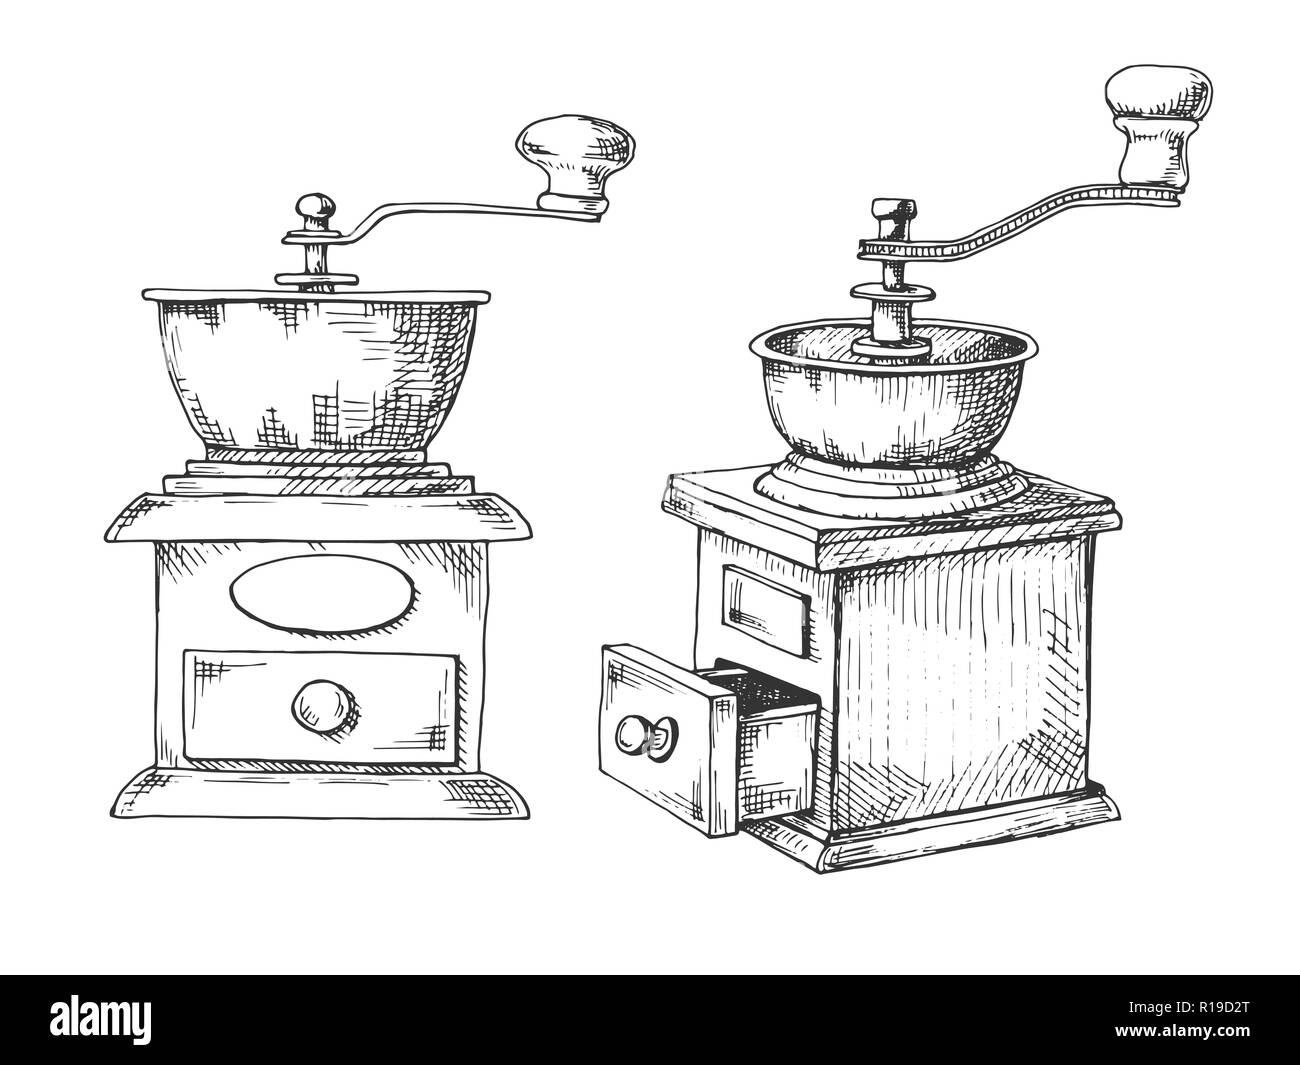 Retro manual coffee grinder or mill sketch in vintage style. Stock Vector